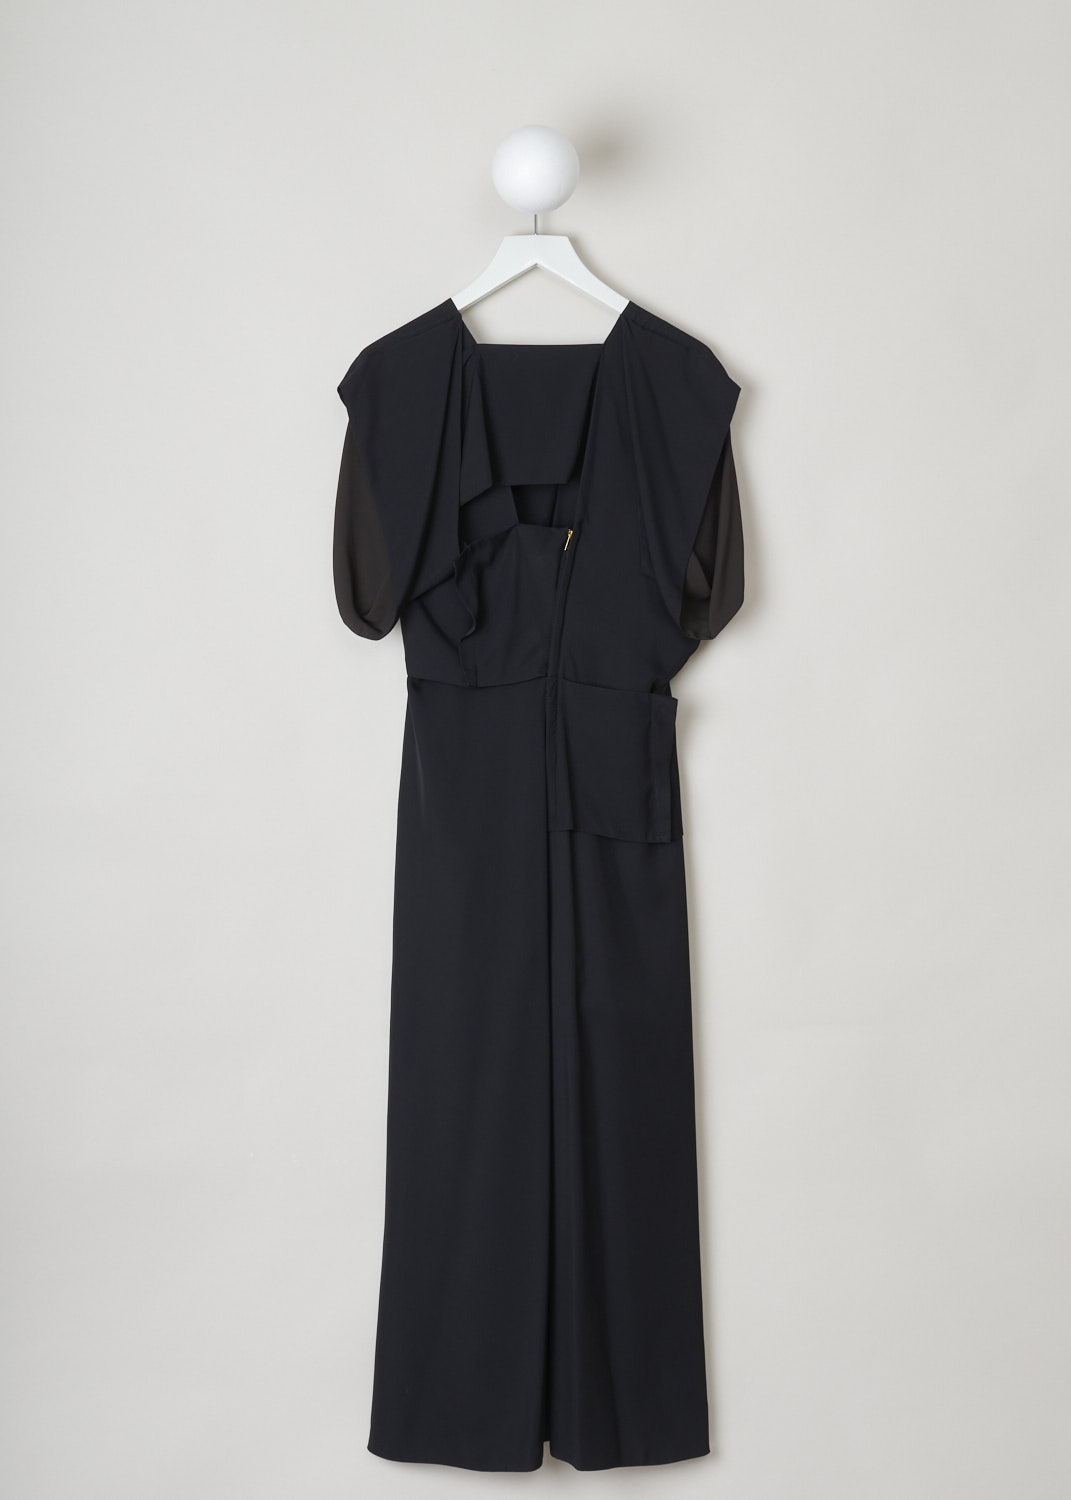 Bottega Veneta, Loose fitted black patchwork dress, 631461_VKUG0_1129, black, back, Loose fitted black dress, akin to a patchwork dress. Strikingly designed neckline, which is v-shaped with a squared off point. Another noticeable feature about this dress is the inverted short sleeve. Going further down the dress you will find a split on the front and back, cut to the same height, which give the illusion of it being a pants. Furthermore, a gold-tone zipper can be found on the back.